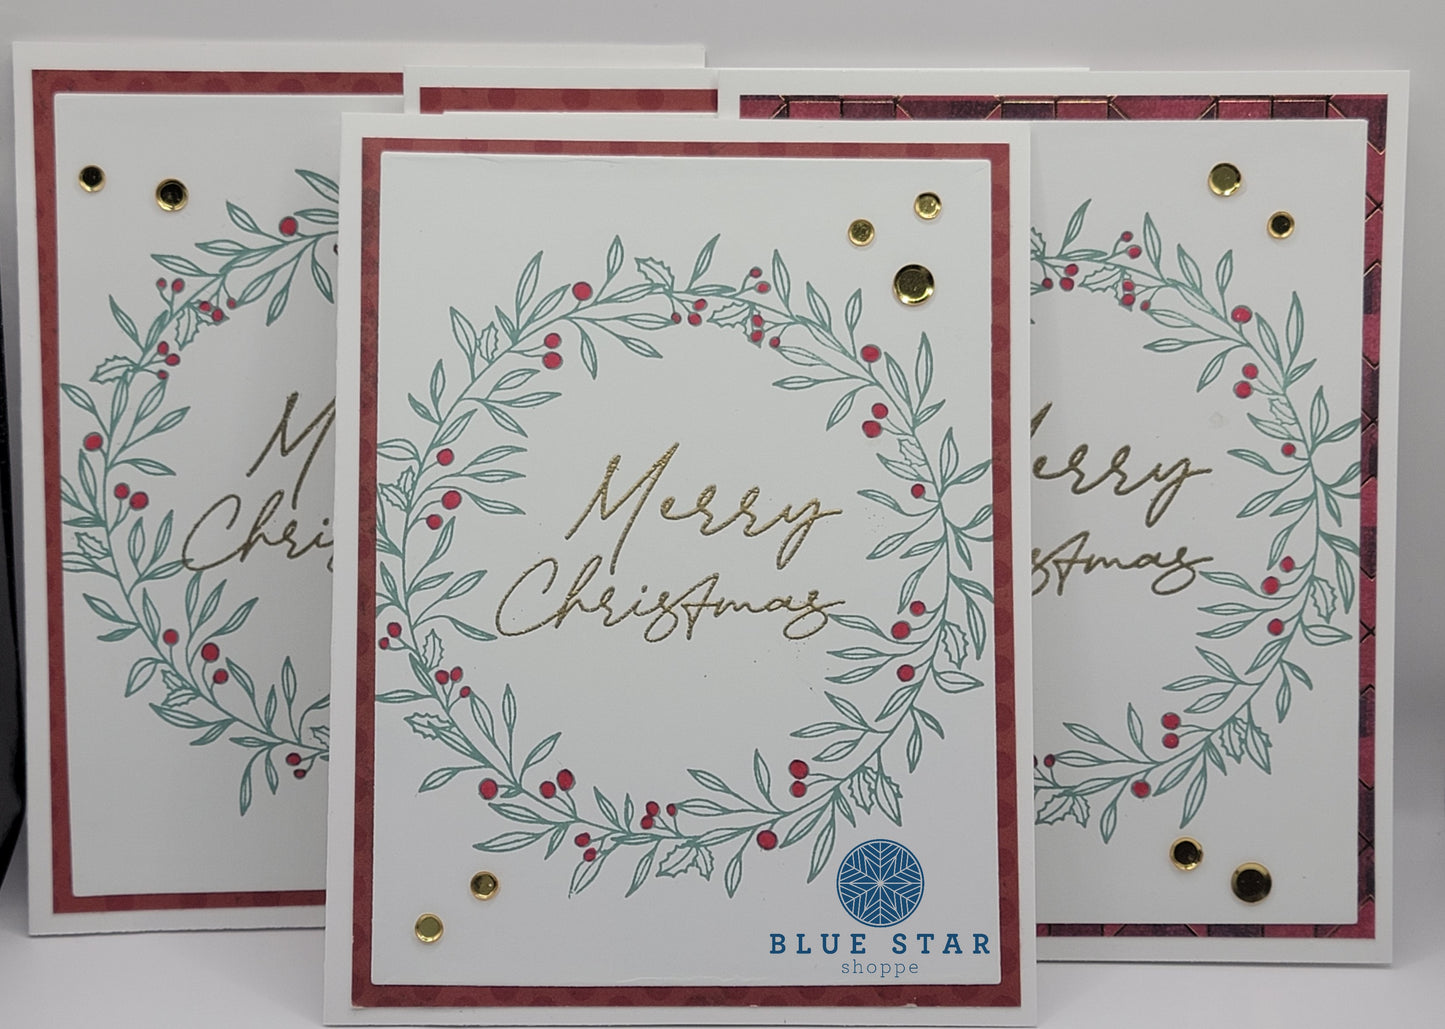 Wreath Holiday set of 8 greeting cards